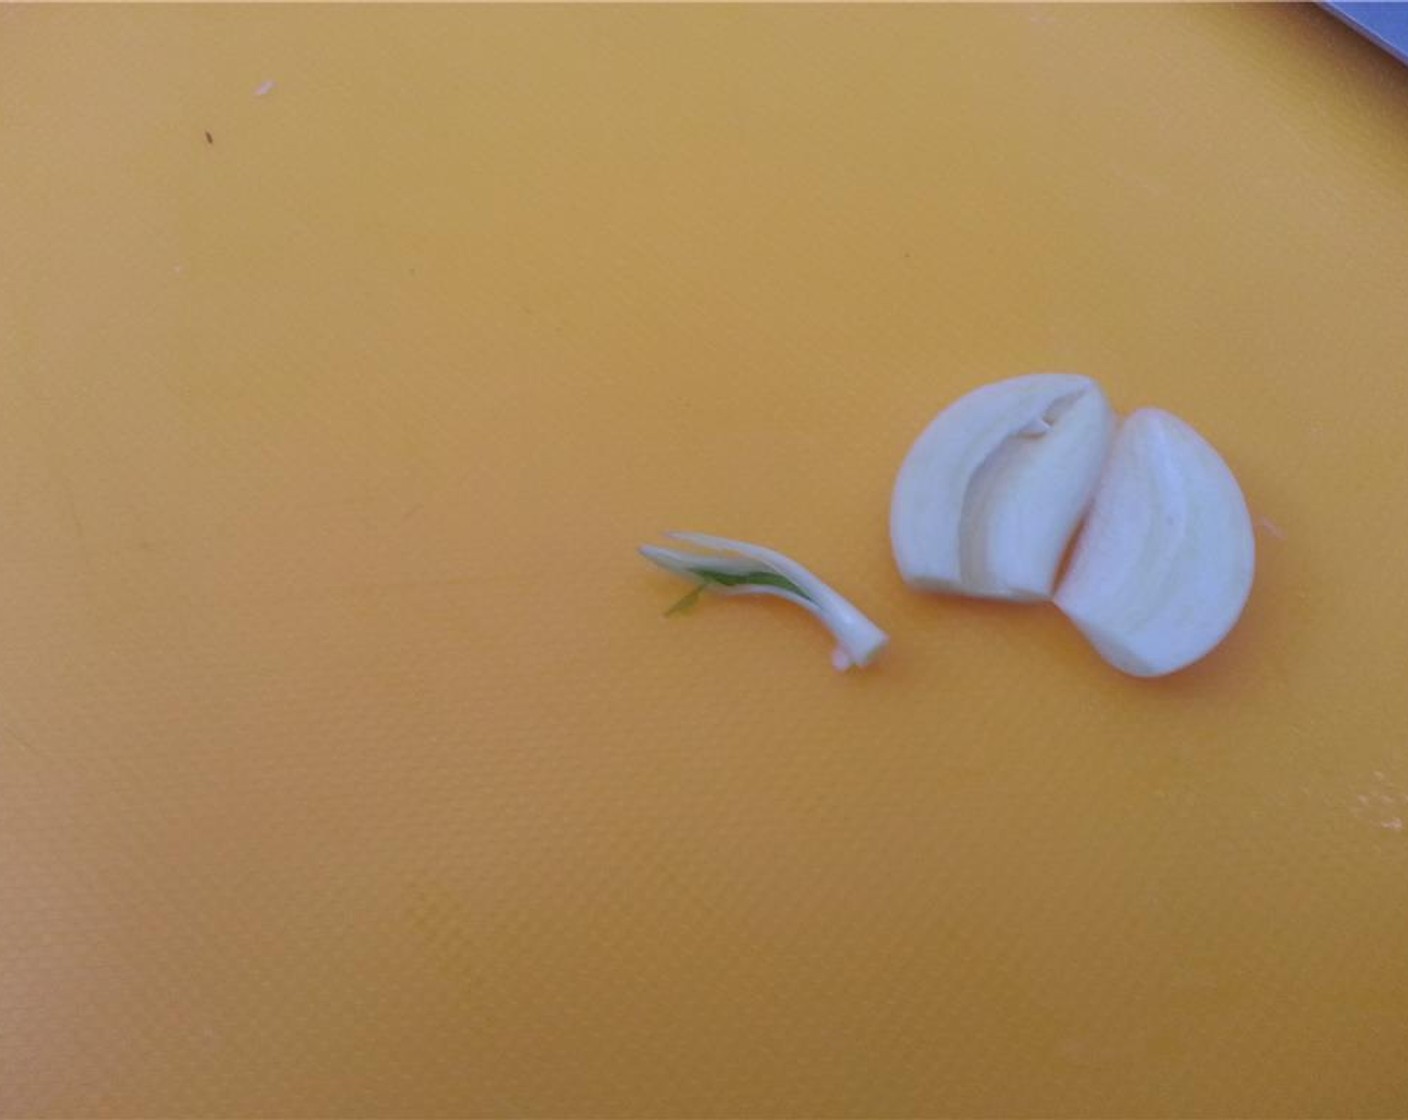 step 5 Peel the Garlic (1 clove) and slice in half. Crush the garlic with the side of your knife. Before crushing I like to remove the green germ just out of habit. Feel free to leave it if you like.